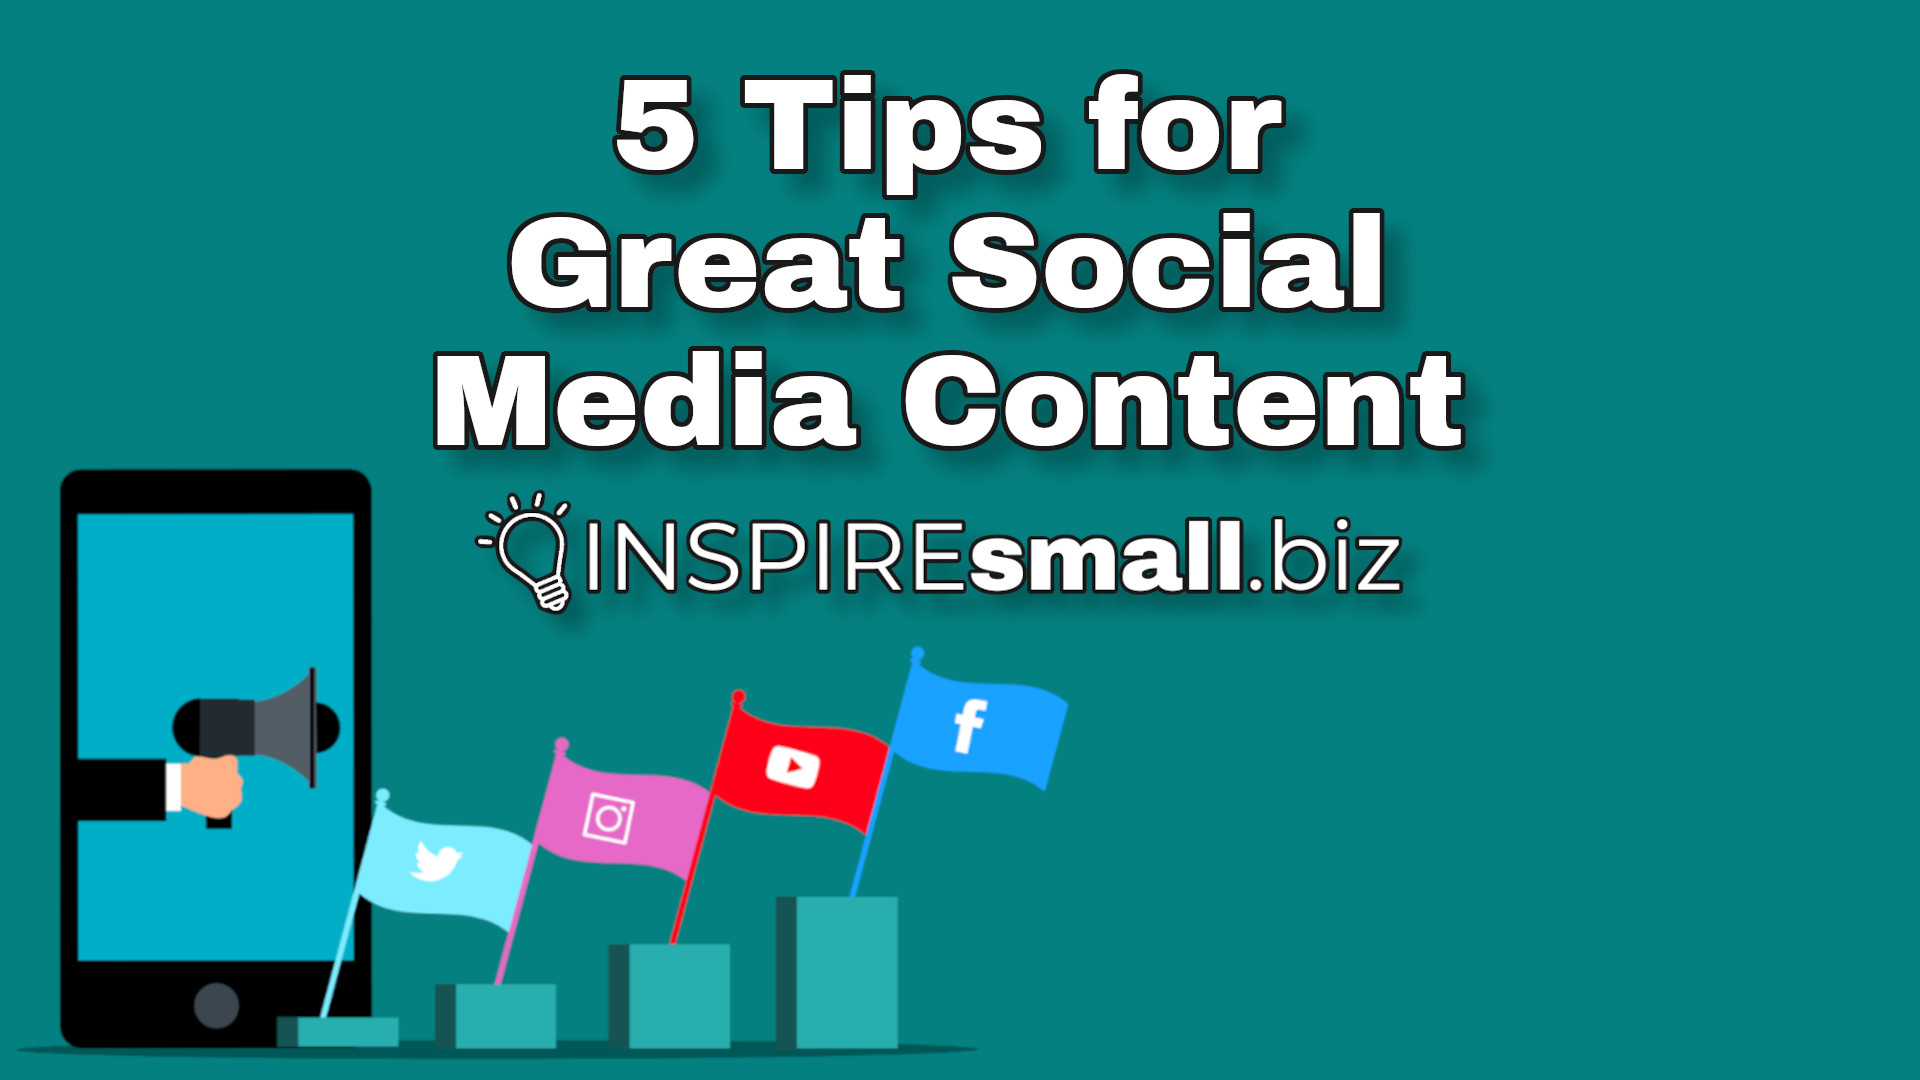 5 Ideas for Great Social Media Content